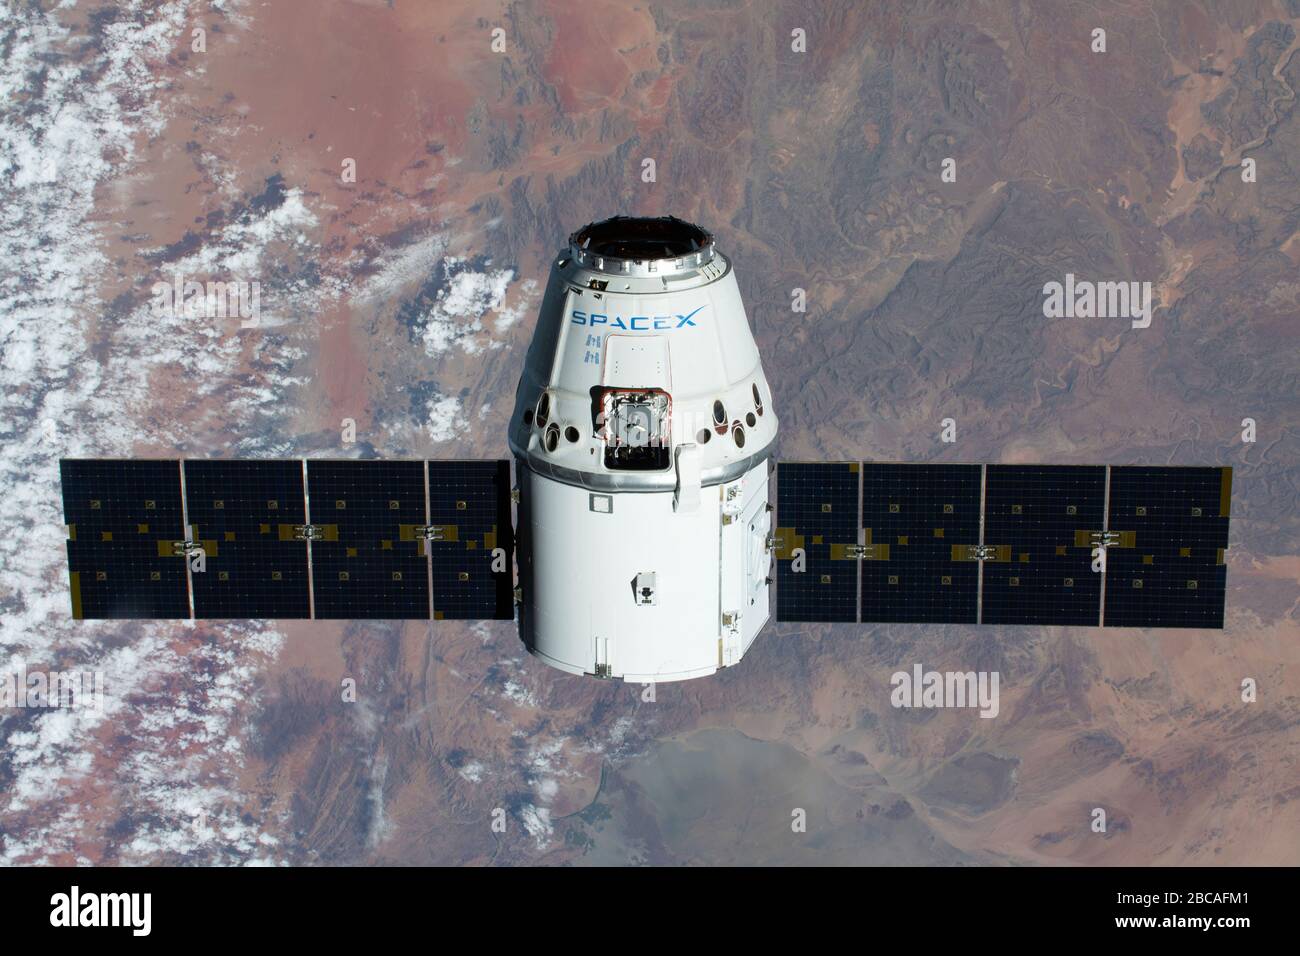 ISS - 09 Mar 2020 - The SpaceX Dragon resupply ship is pictured approaching the International Space Station as both spacecraft were soaring 267 miles Stock Photo